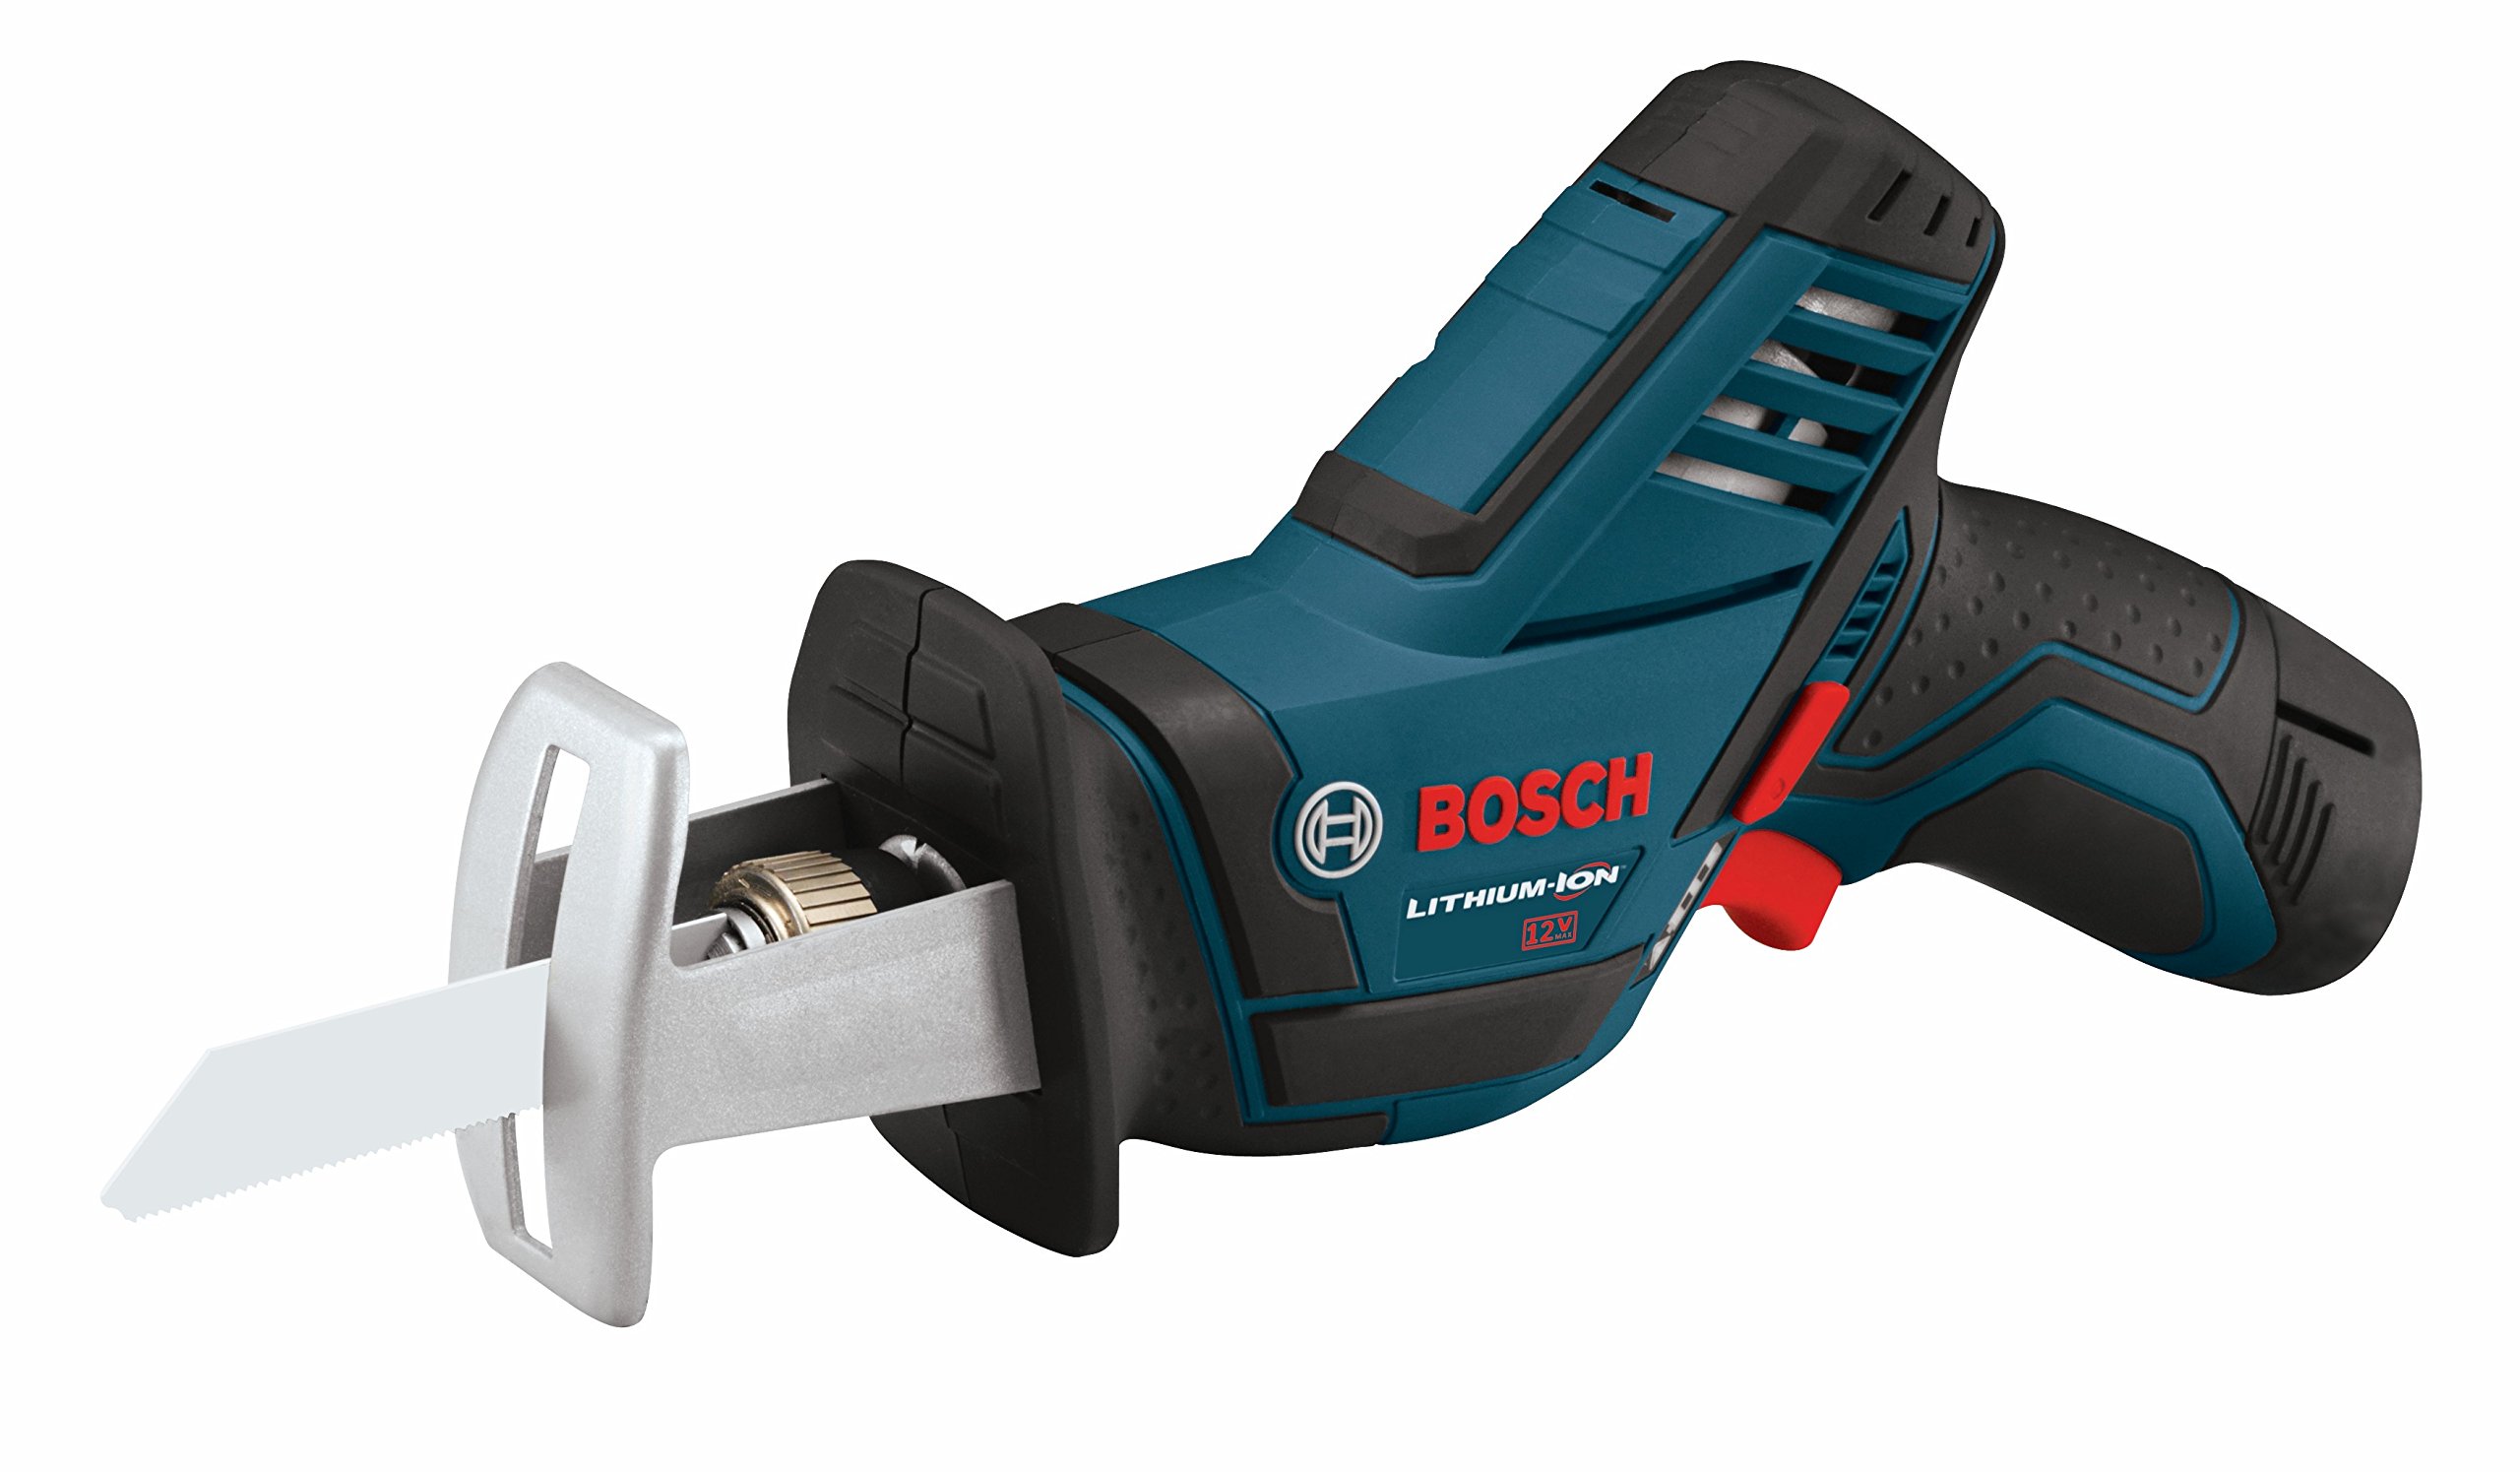 BOSCH Power Tools Combo Kit GXL12V-310B22 - 12V Max 3-Tool Set with 3/8 In. Drill/Driver, Pocket Reciprocating Saw and LED Worklight